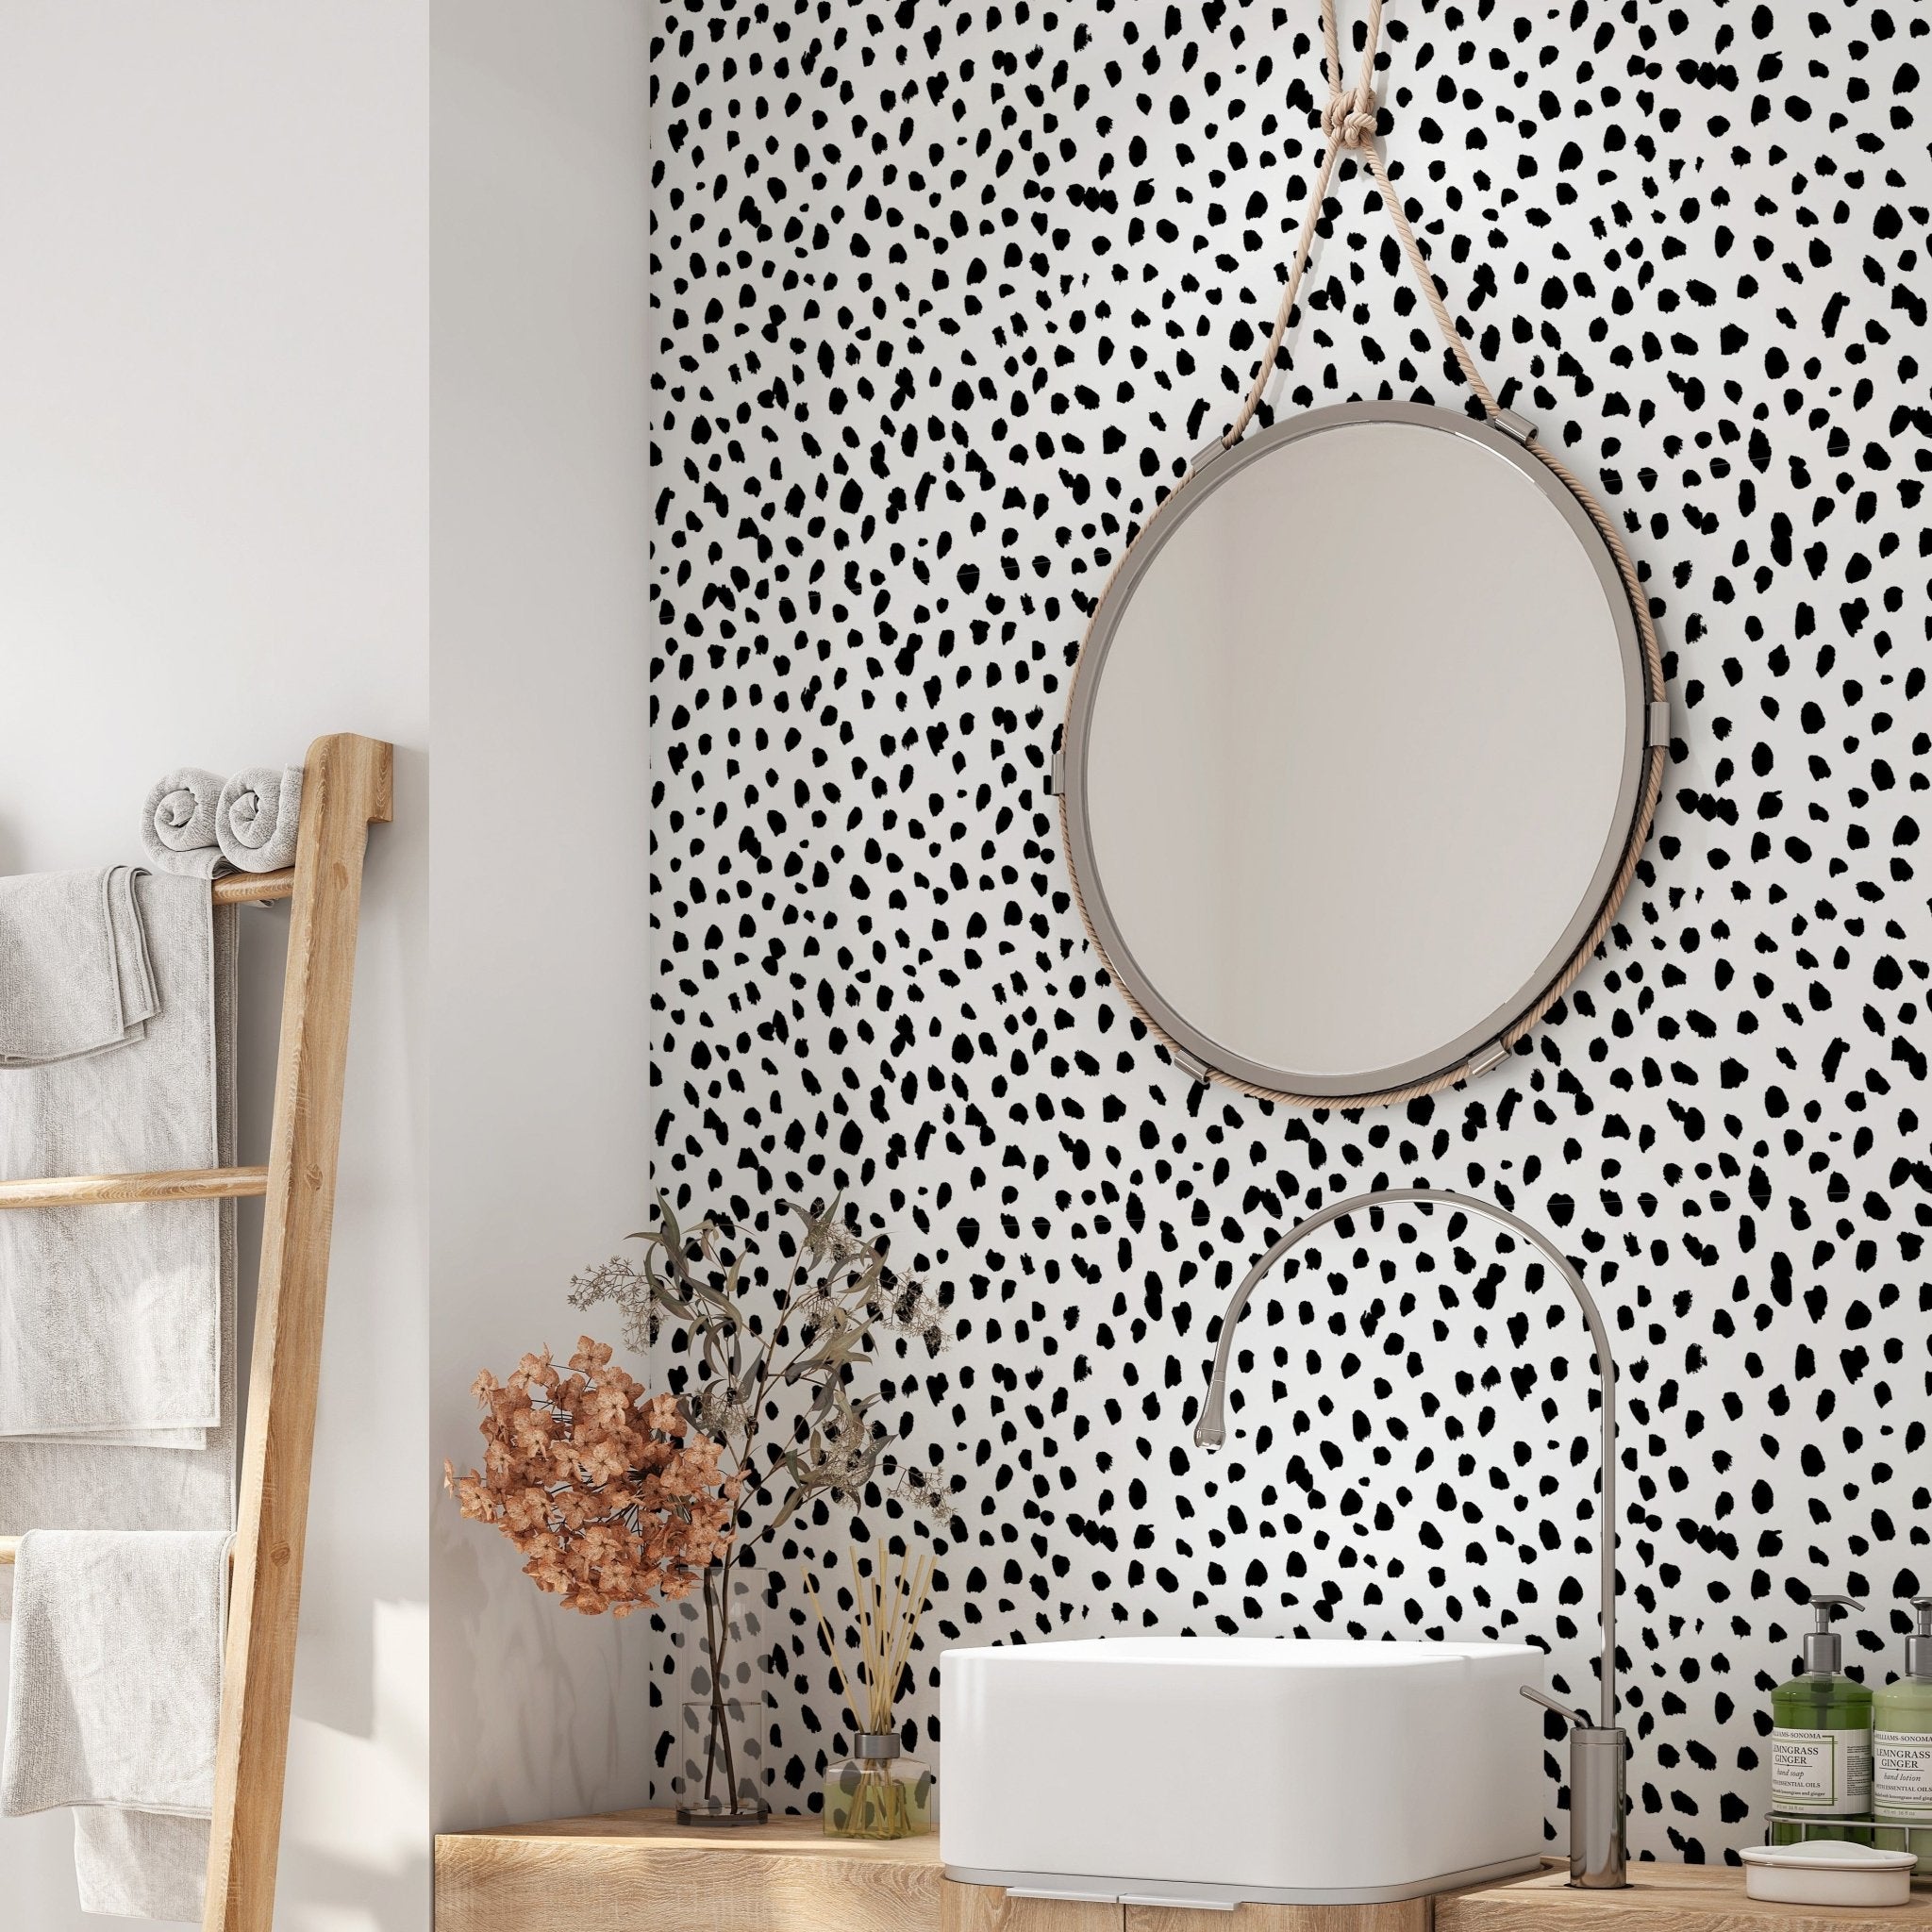 Dalmatian Peel and Stick Wallpaper, Removable Wallpaper, Rocky Mountain Decals, wallpaper, removable peel and stick wallpaper